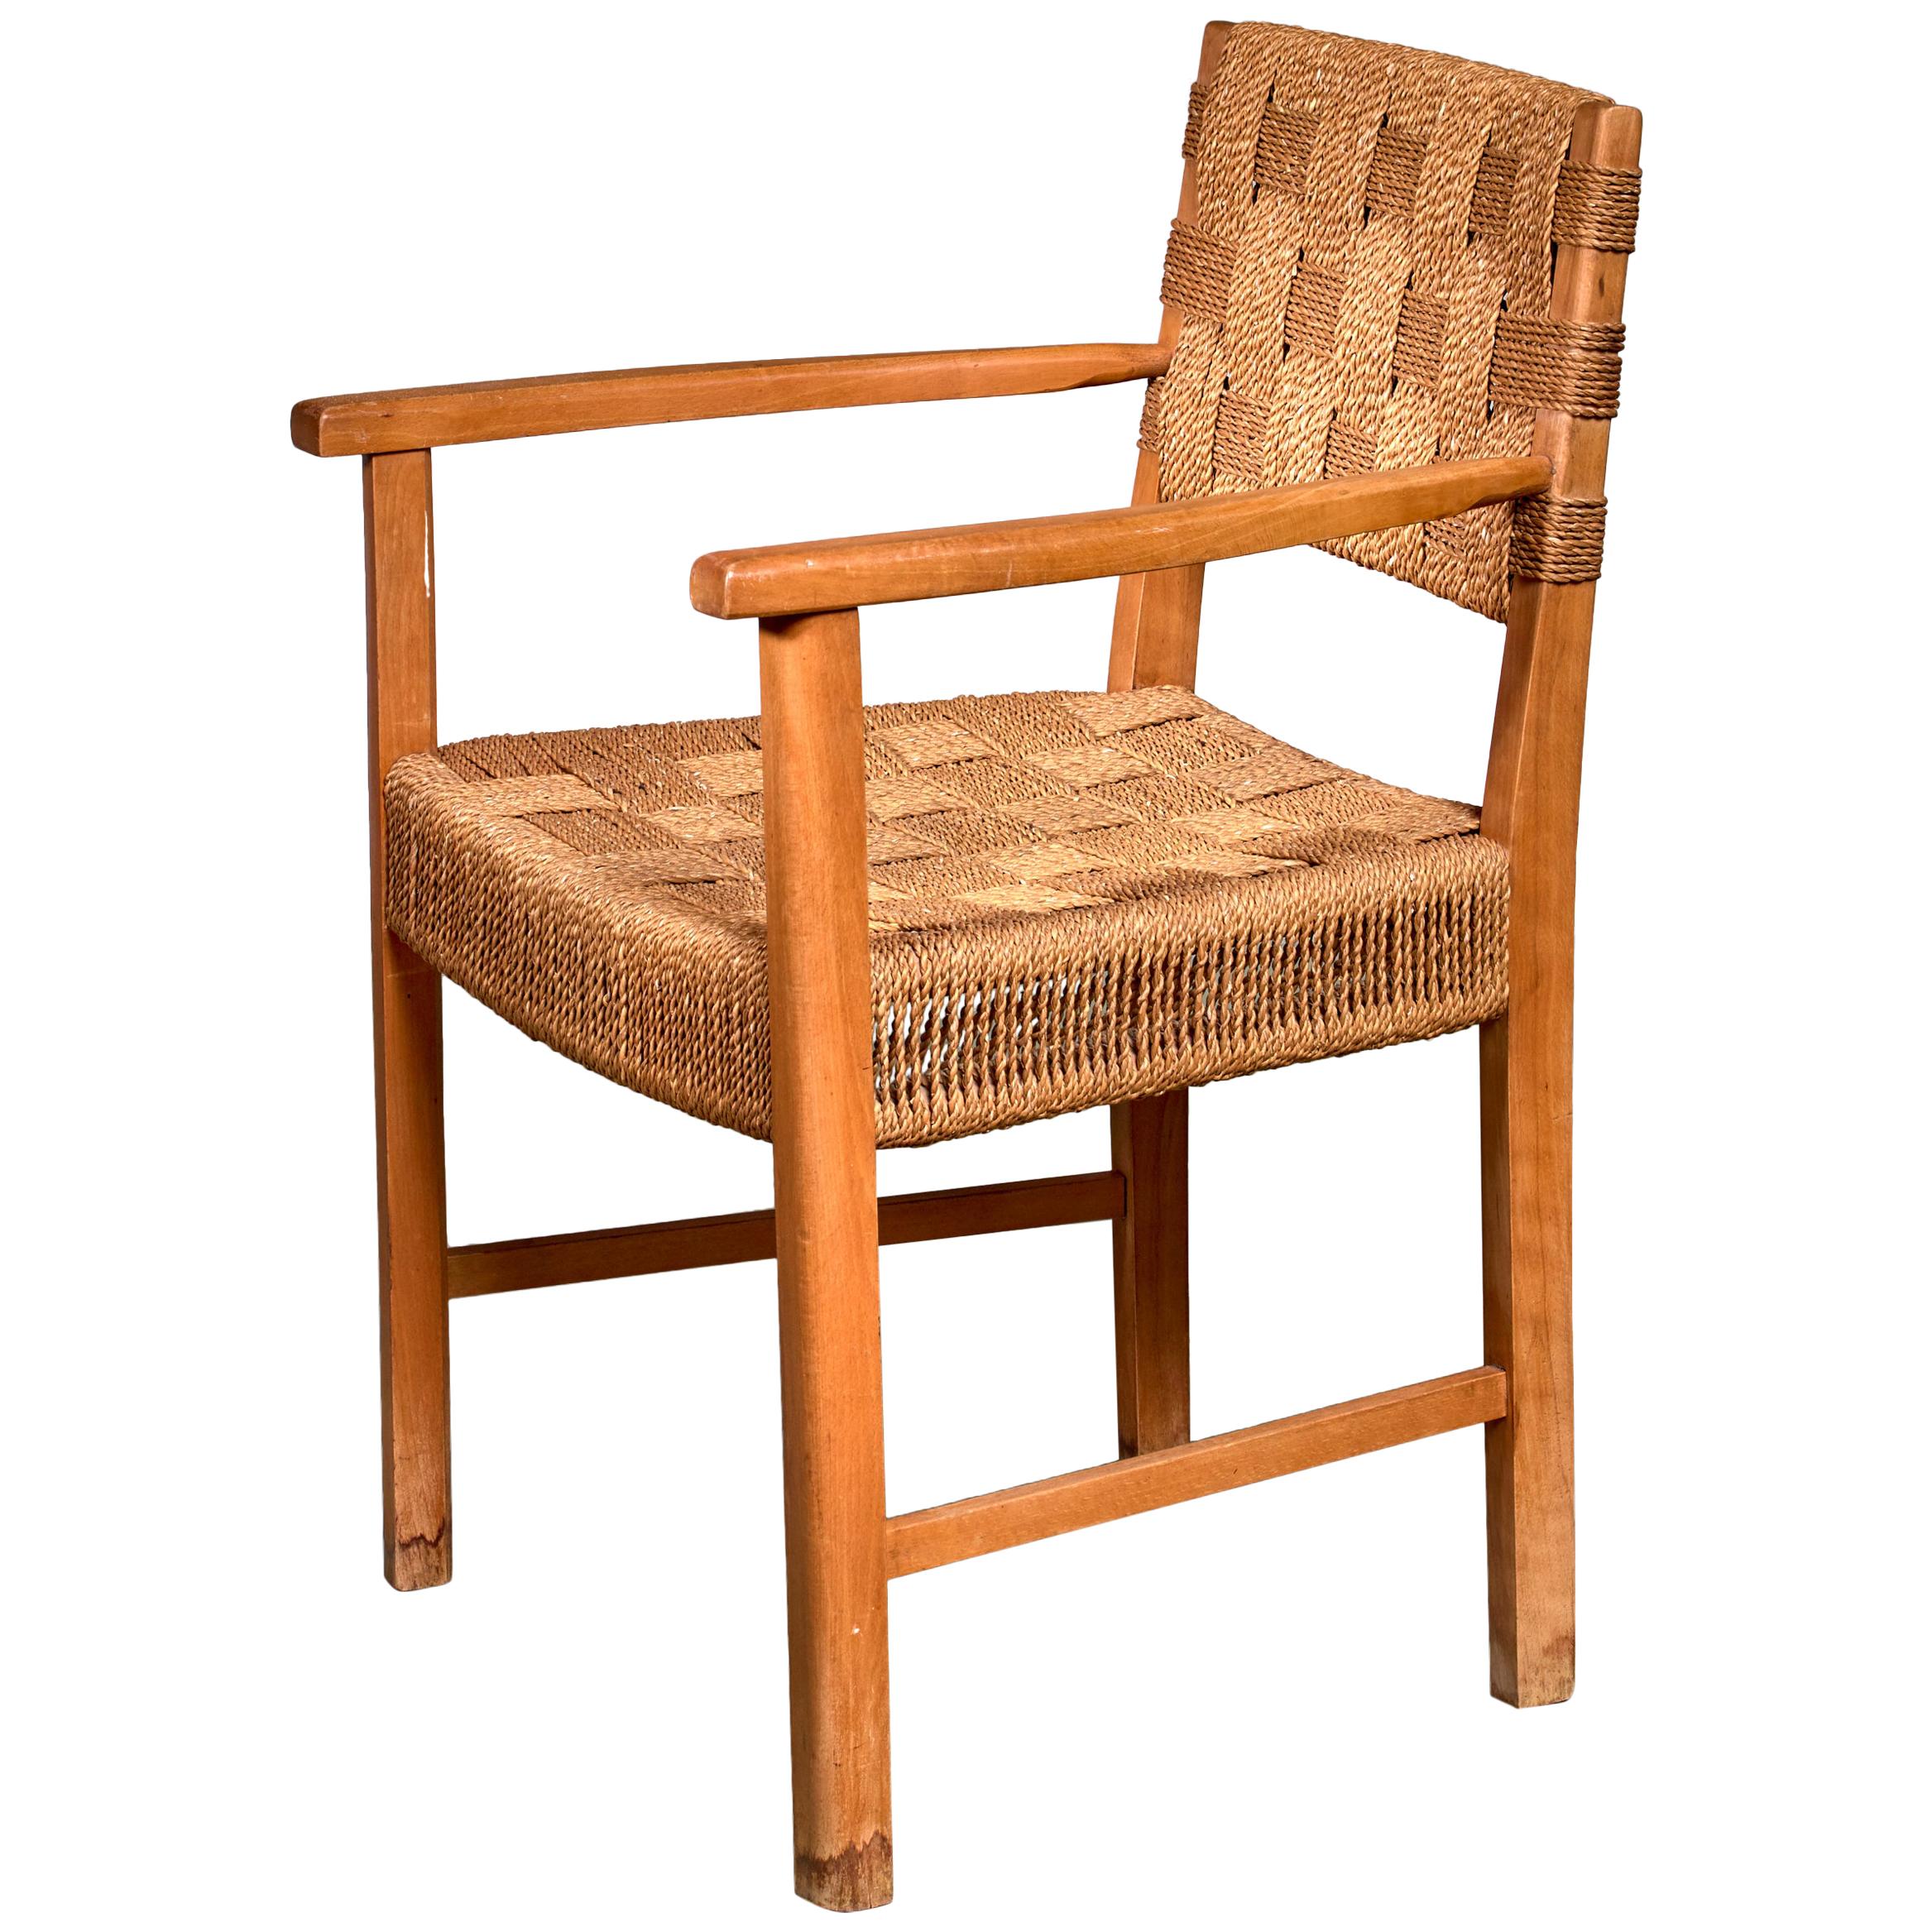 Beech and Woven Seagrass Armchair, Denmark, 1940s For Sale